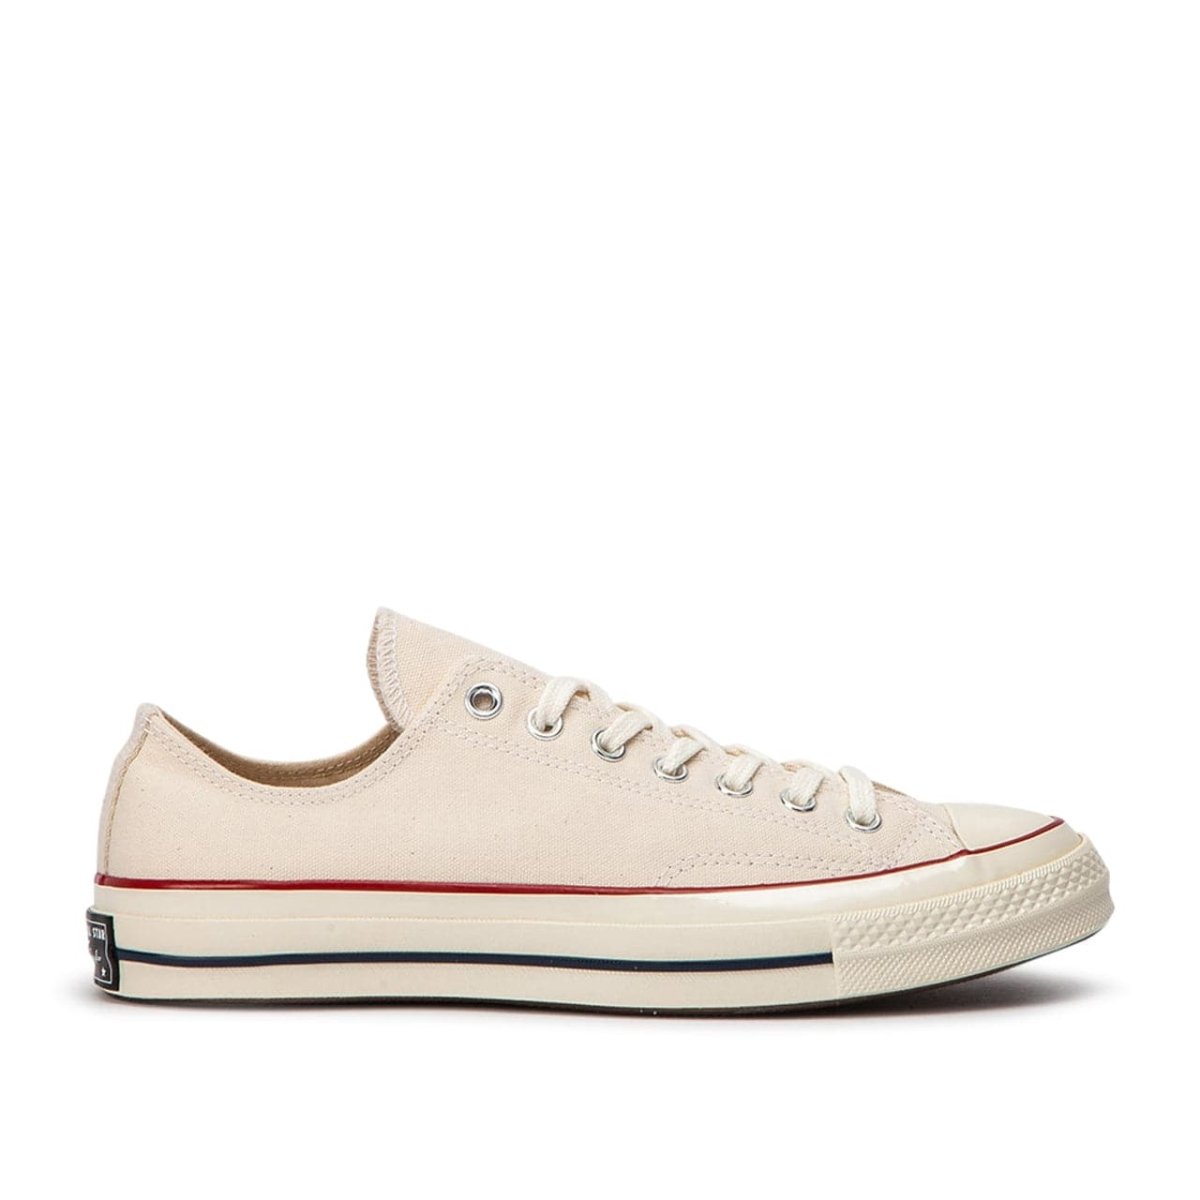 Converse Chuck Taylor 70 Ox Low (Weiß)  - Allike Store